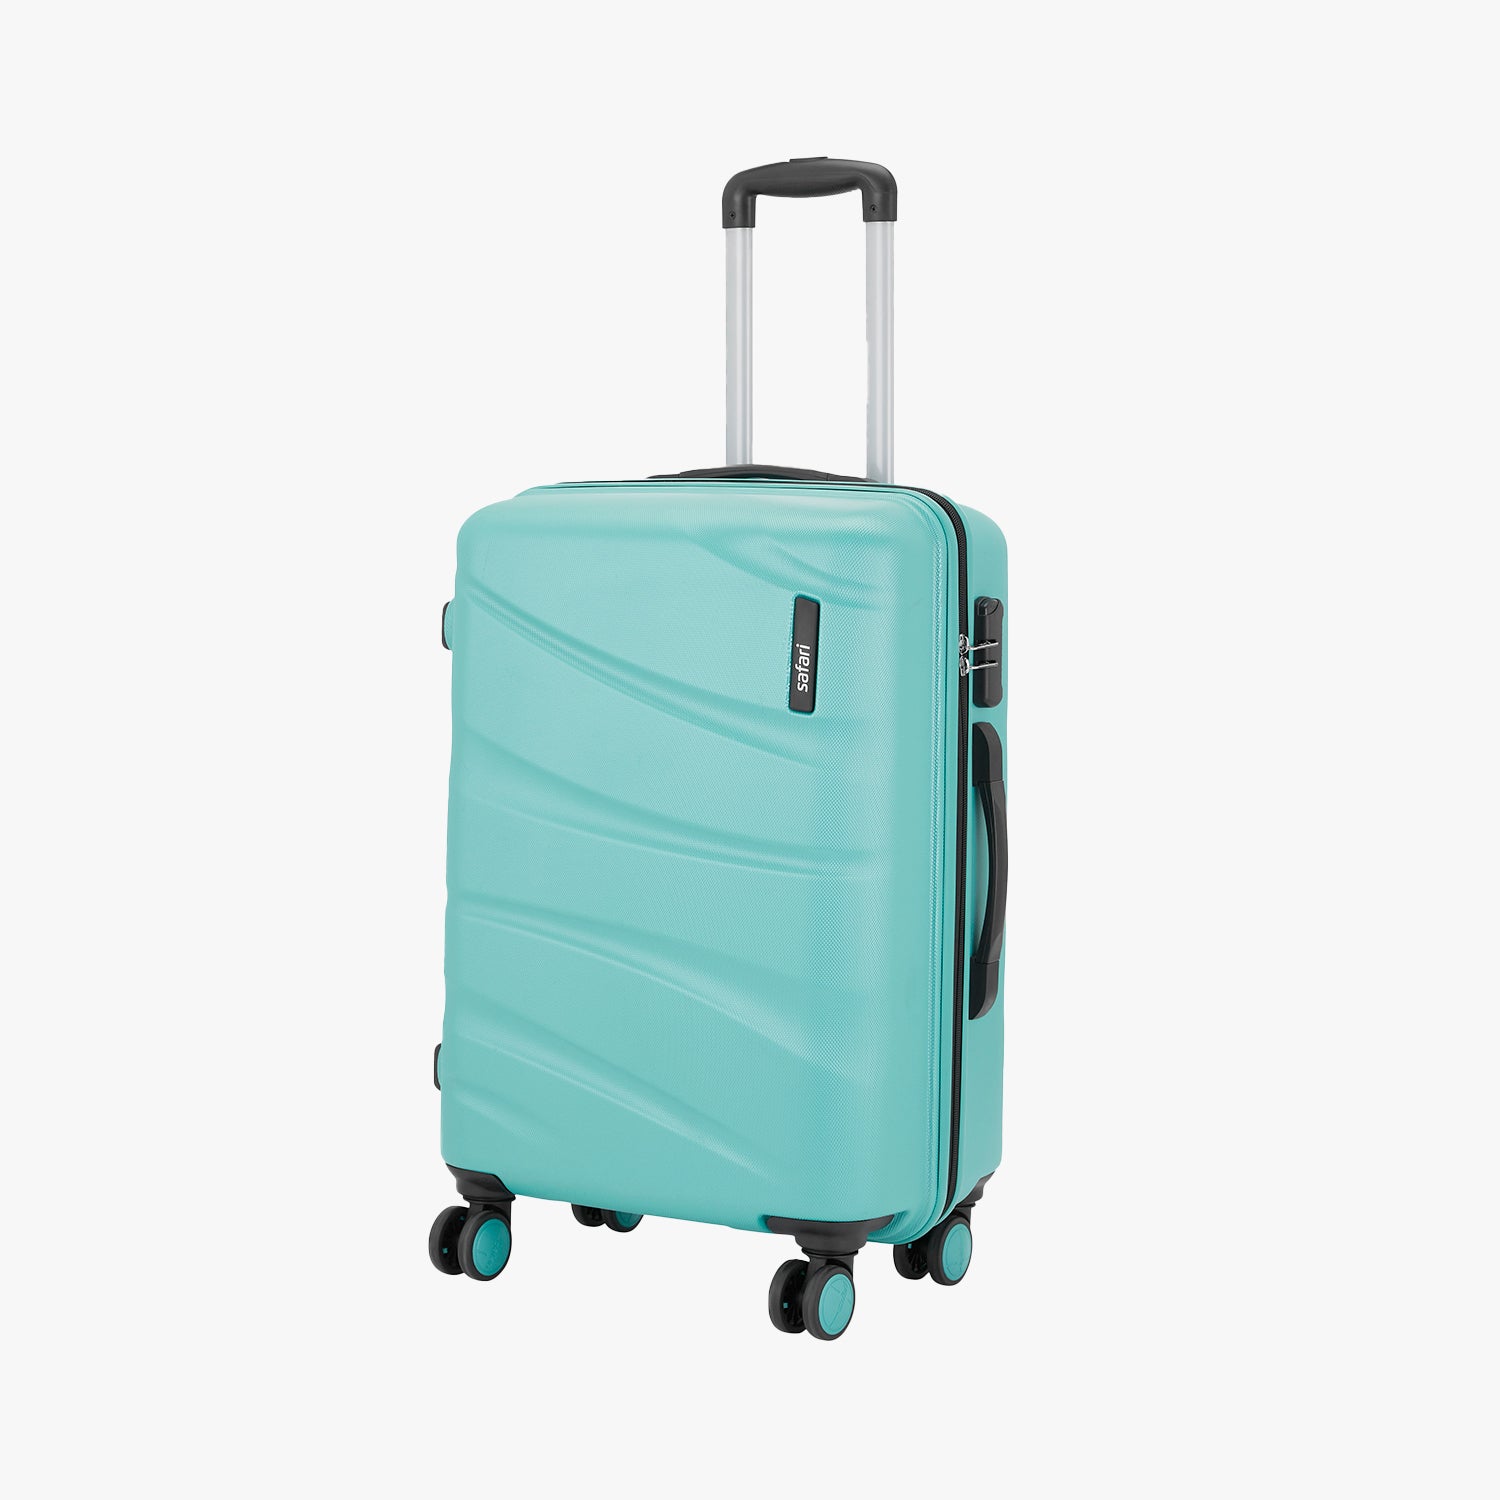 Persia Hard Luggage with Dual Wheels Combo (Small and Medium)- Spearmint